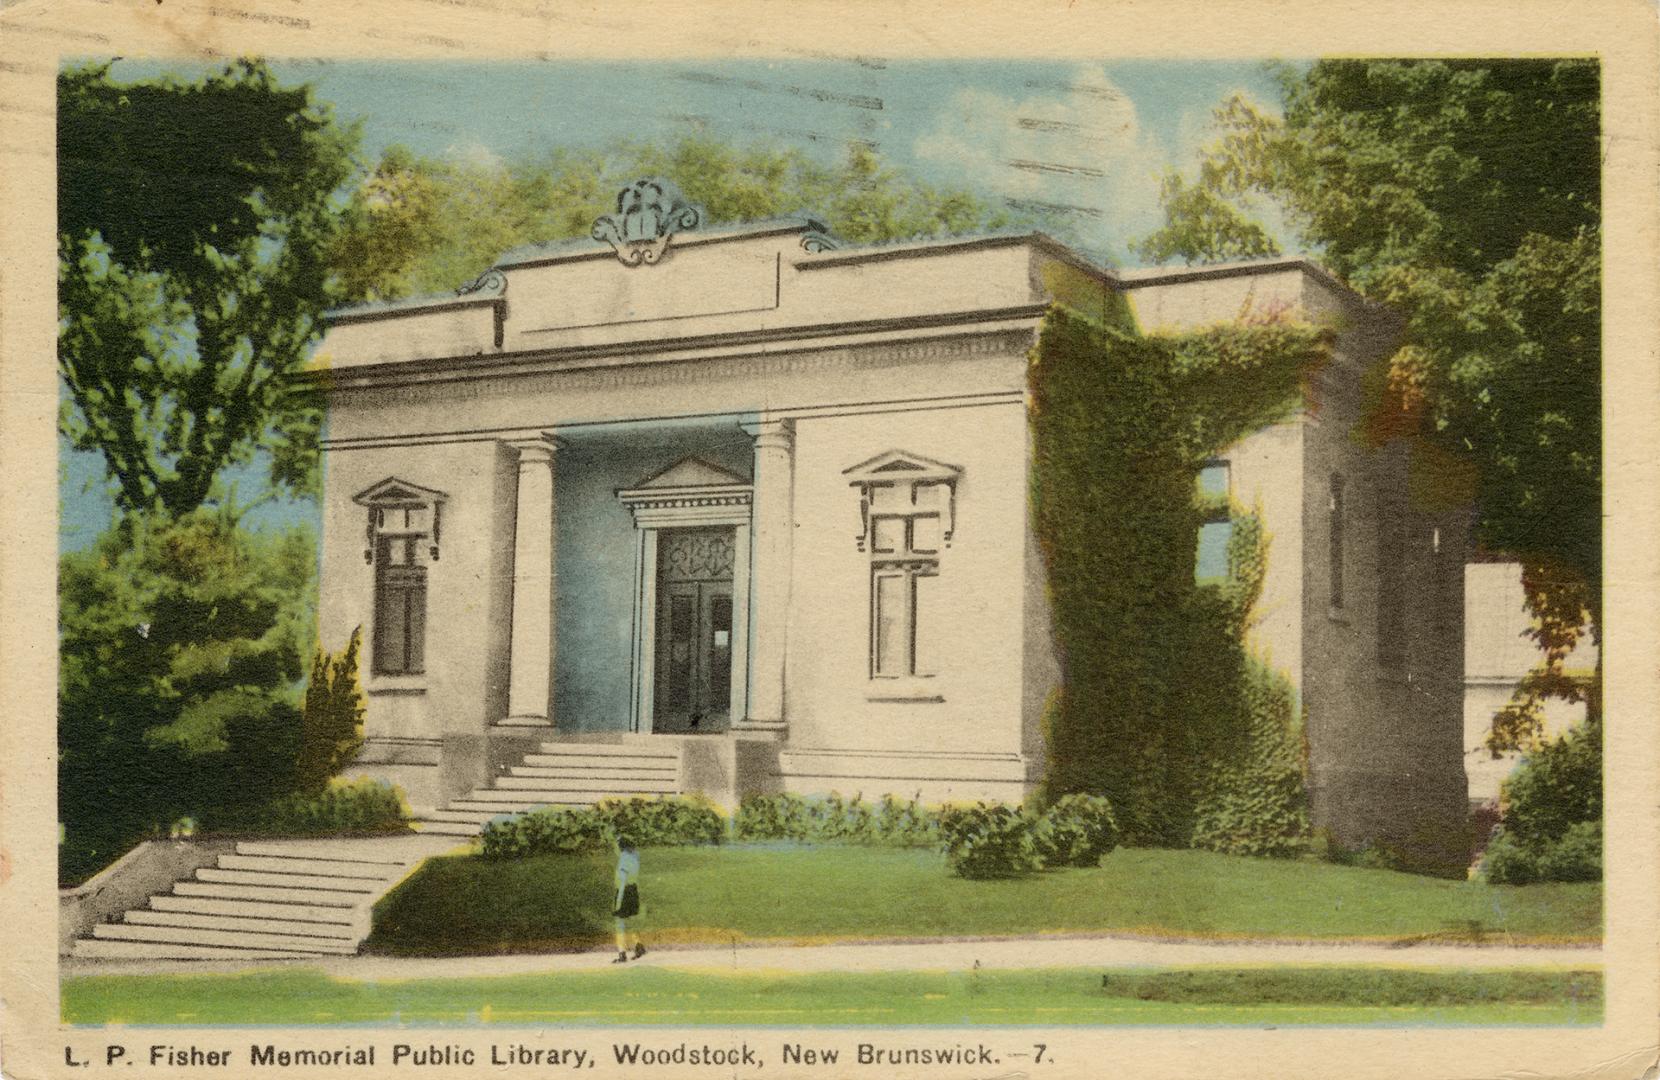 Picture of one storey brick and grey stone library building. 